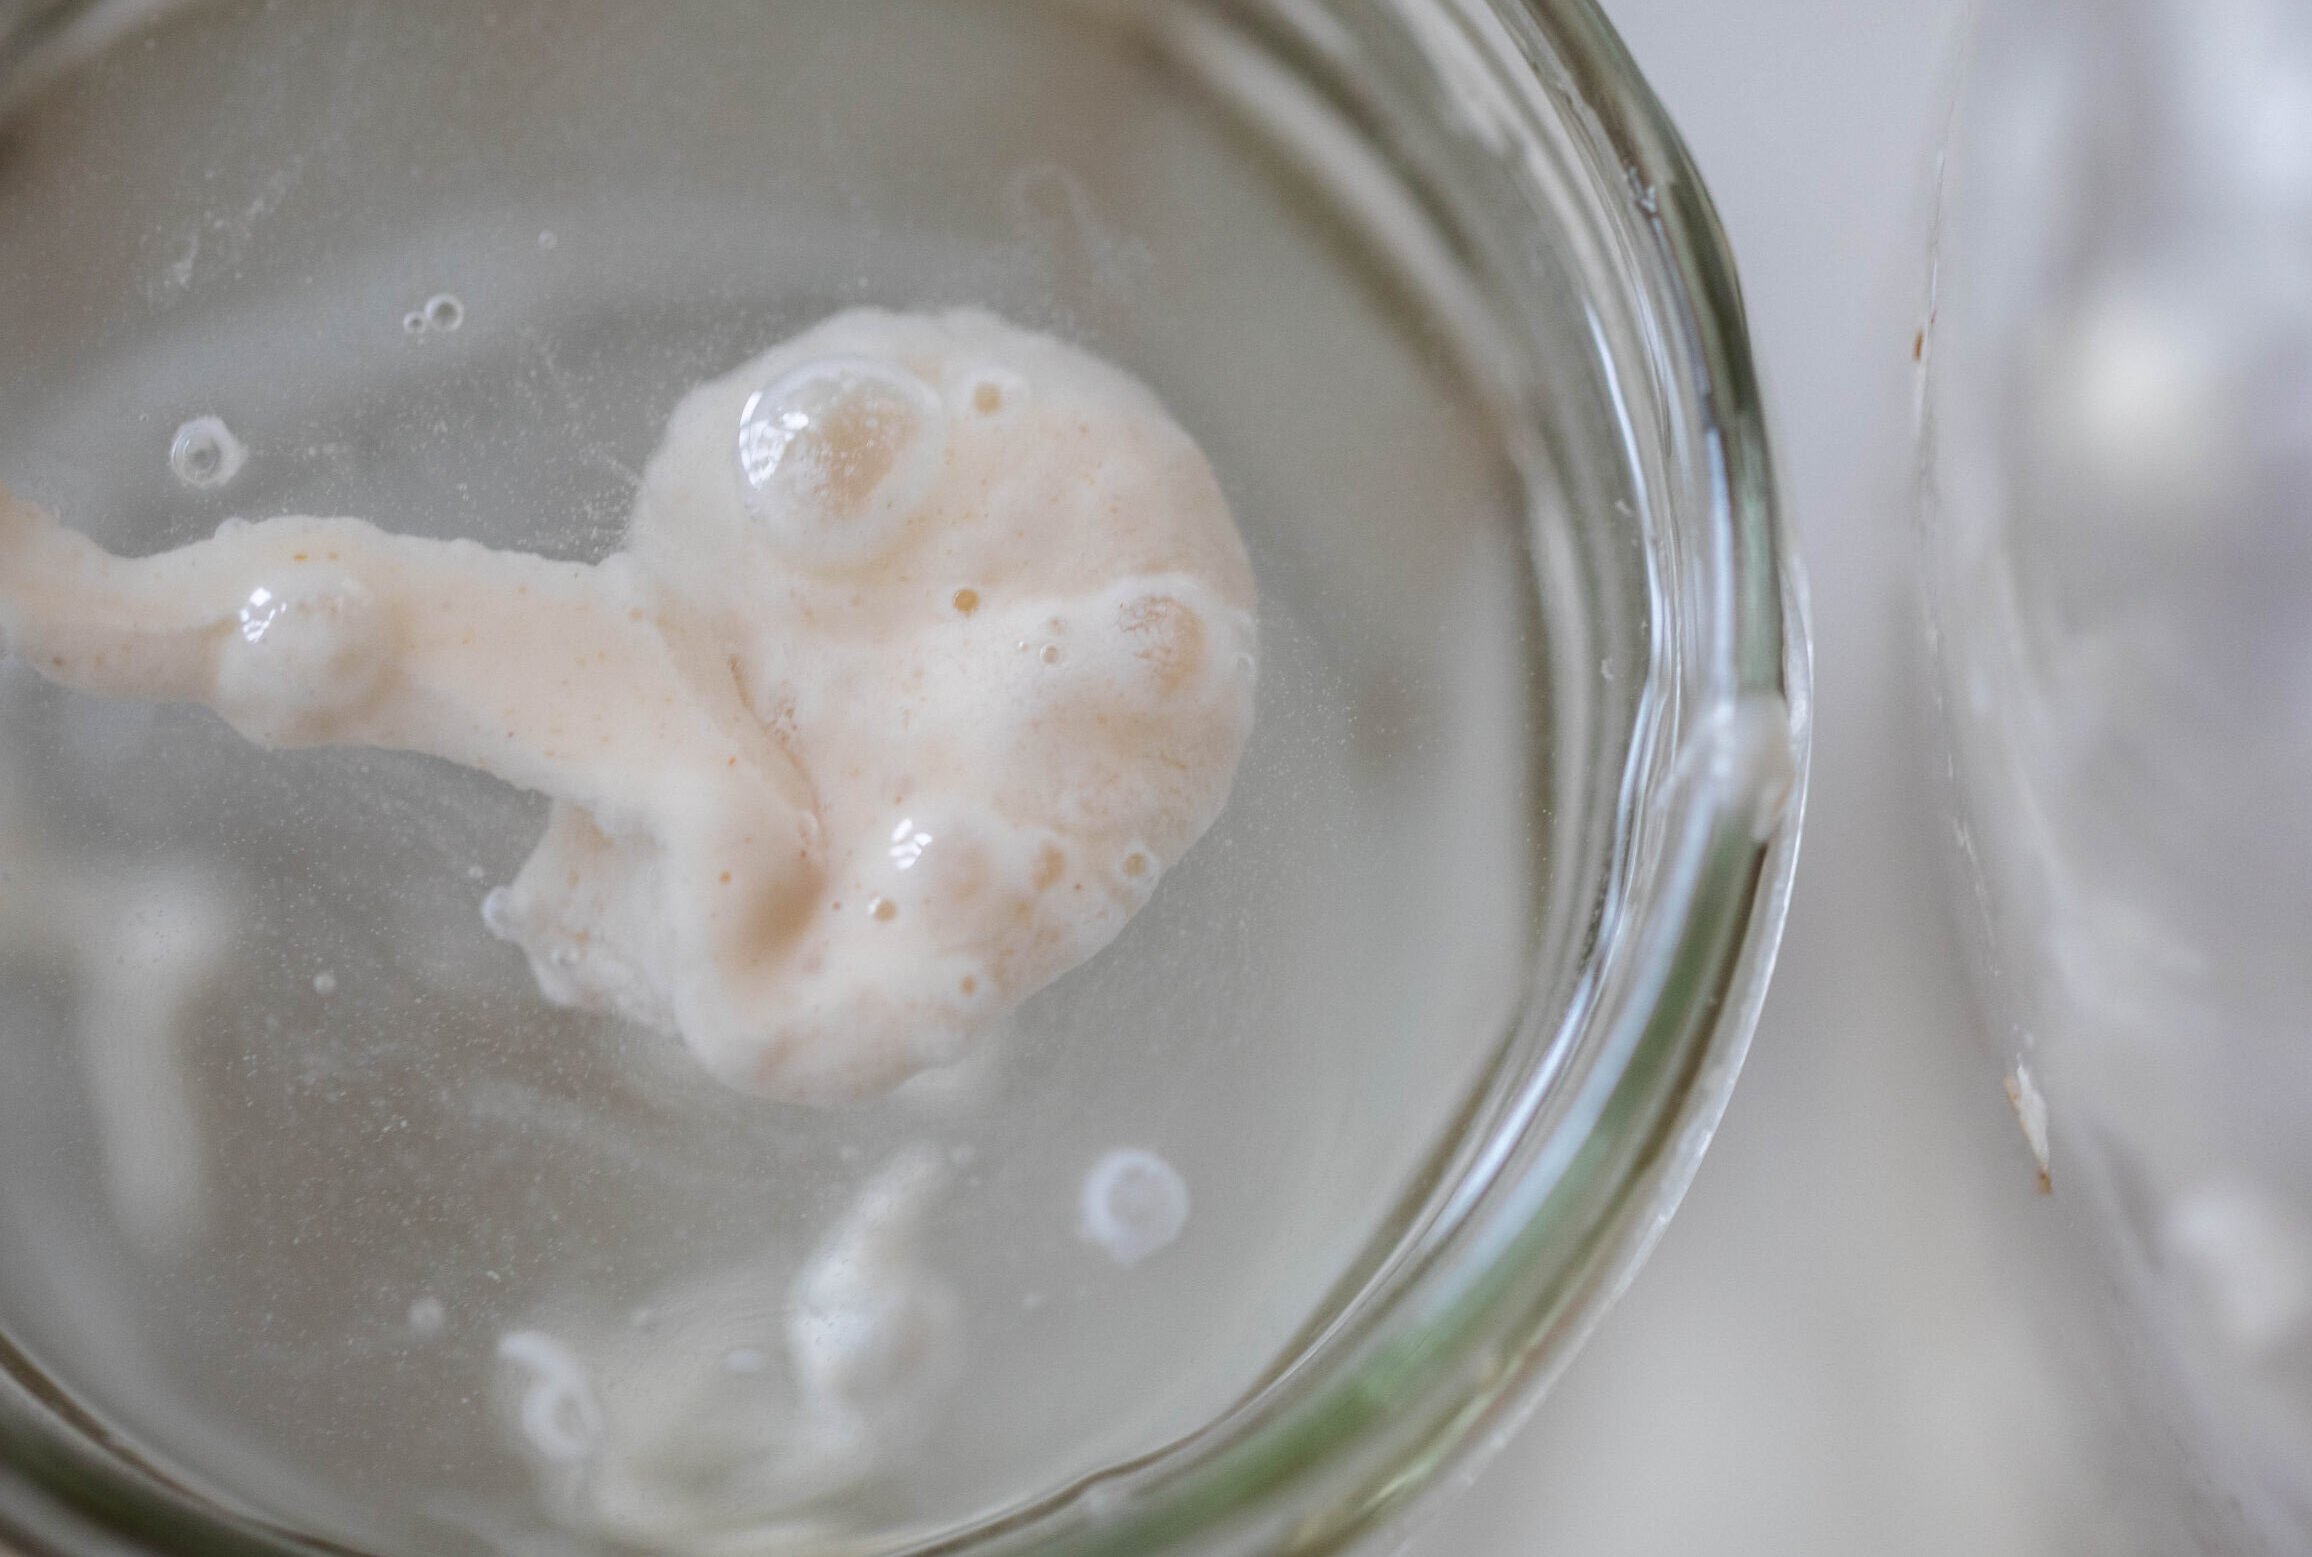 a close up photo of sourdough starter floating in water